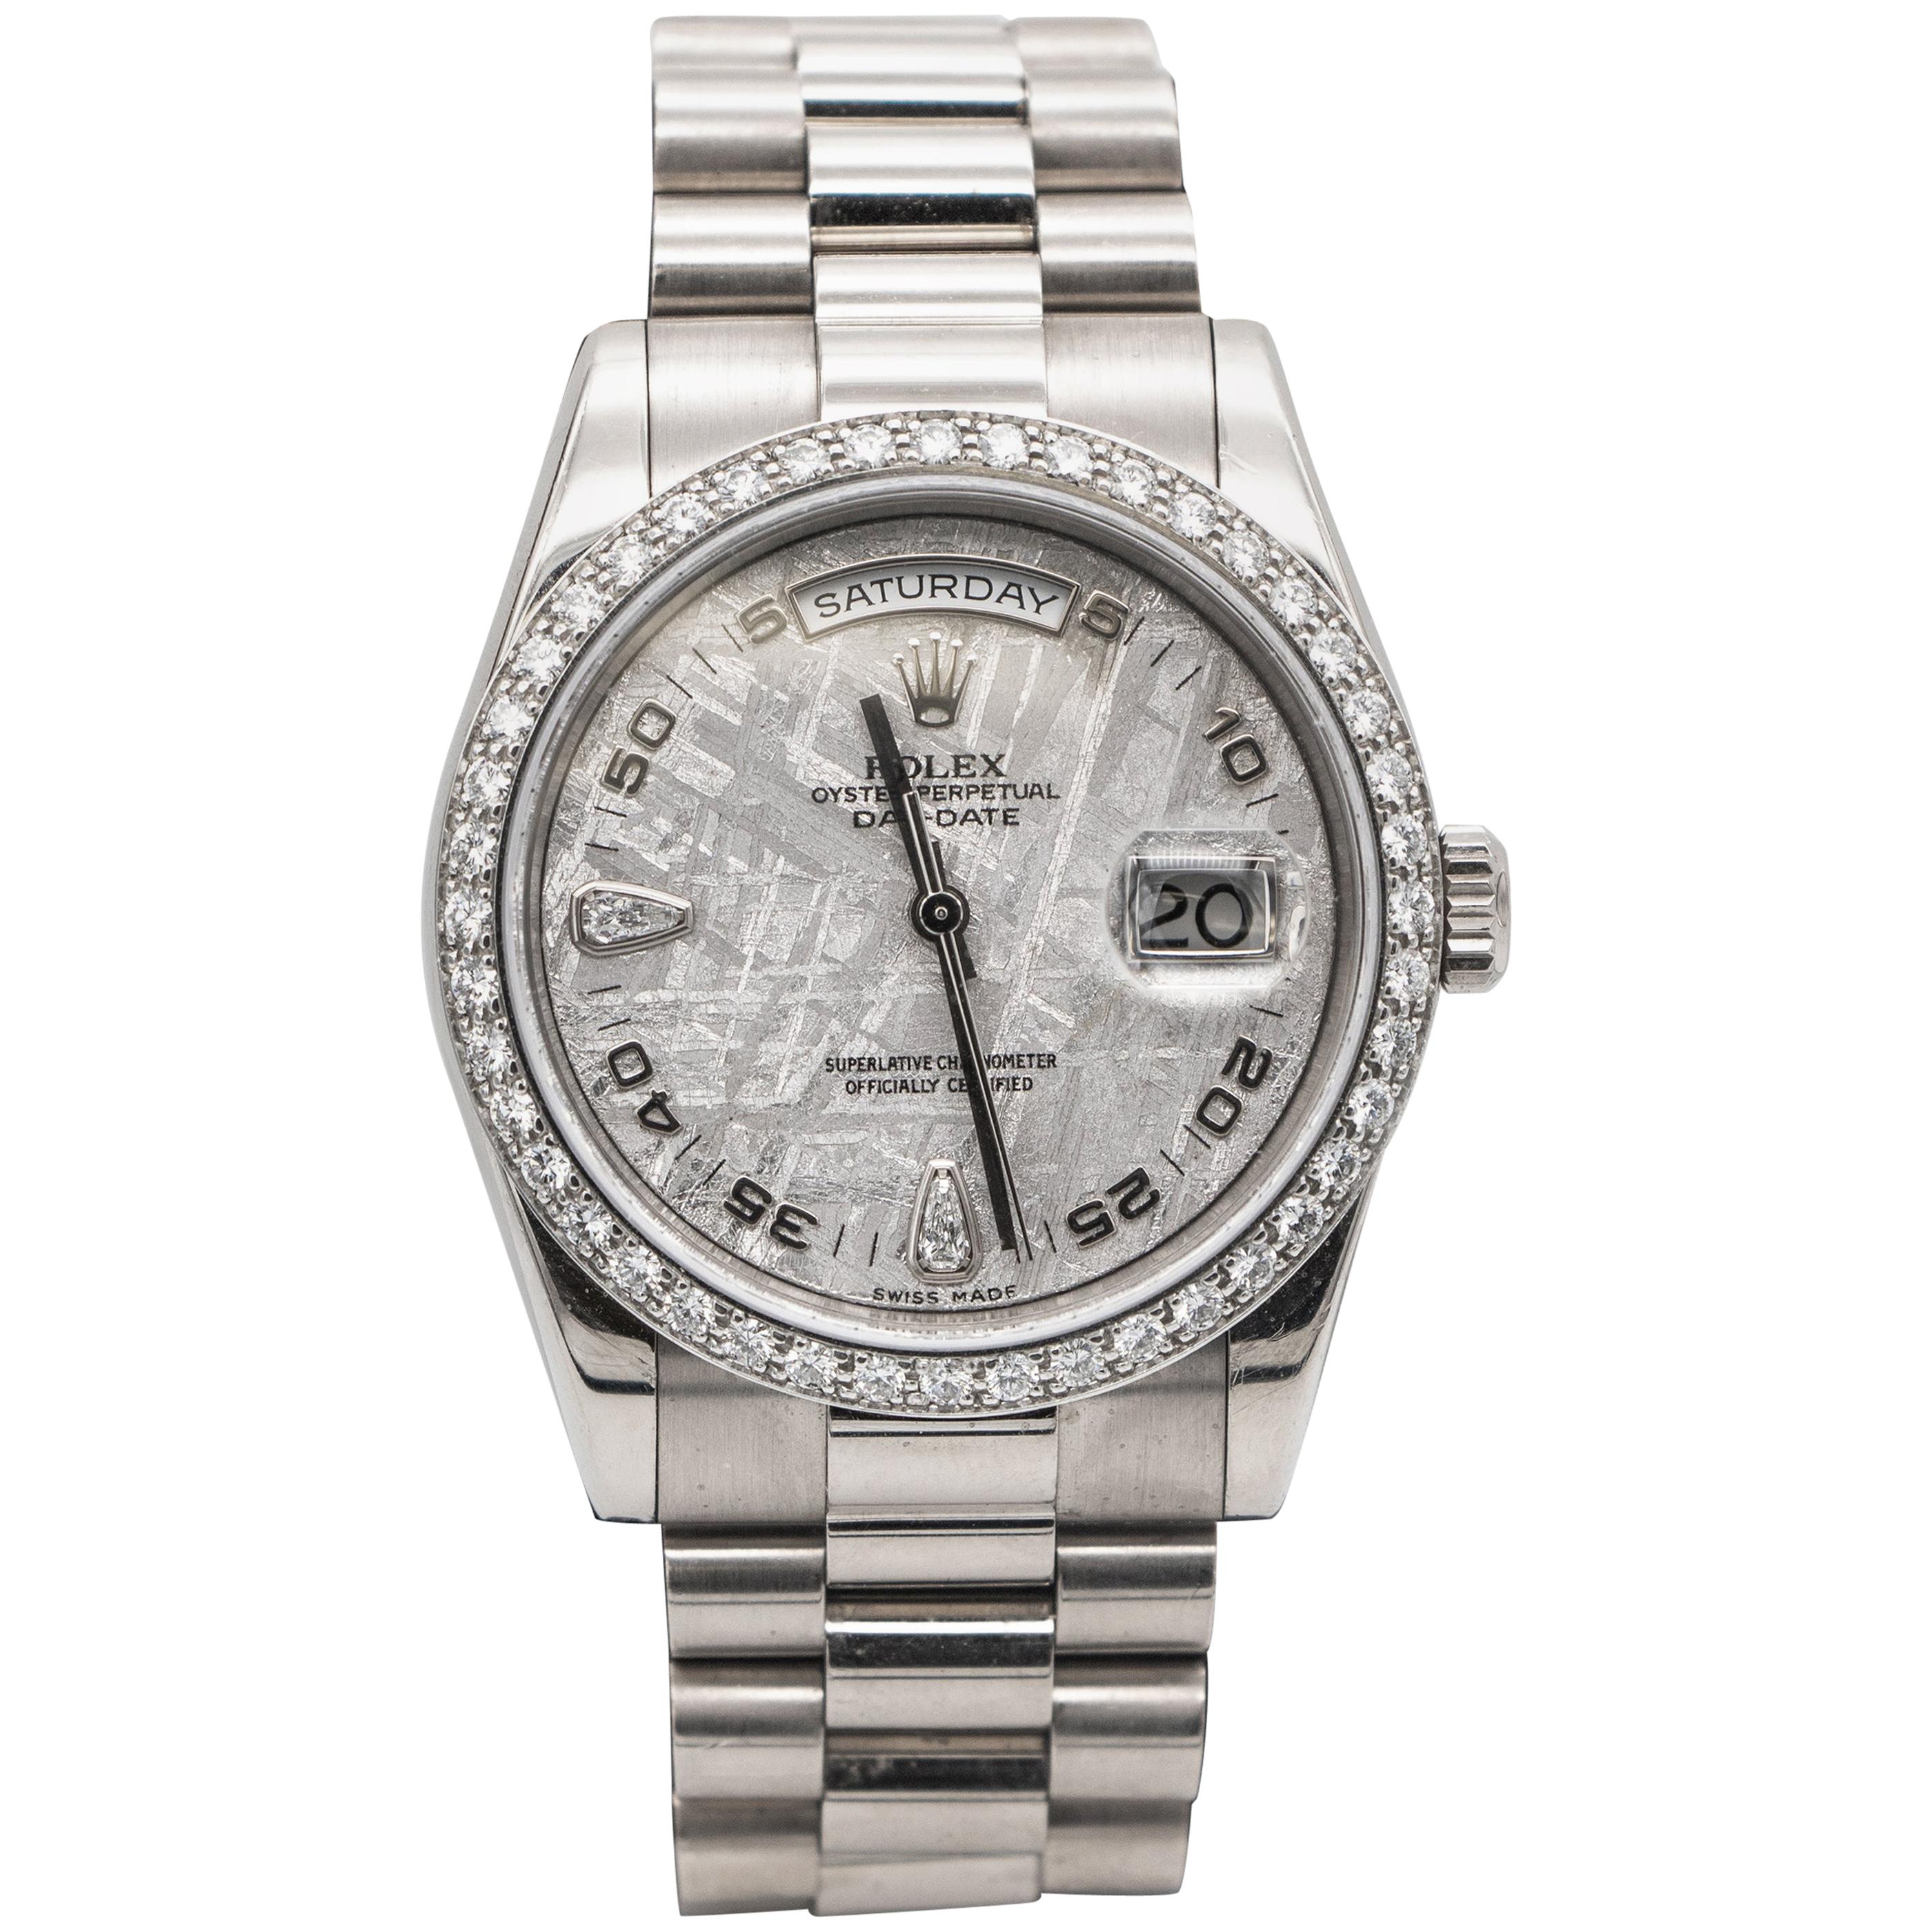 Special Edition Meteorite Rolex Oyster Perpetual Day-Date 46 Factory Diamonds